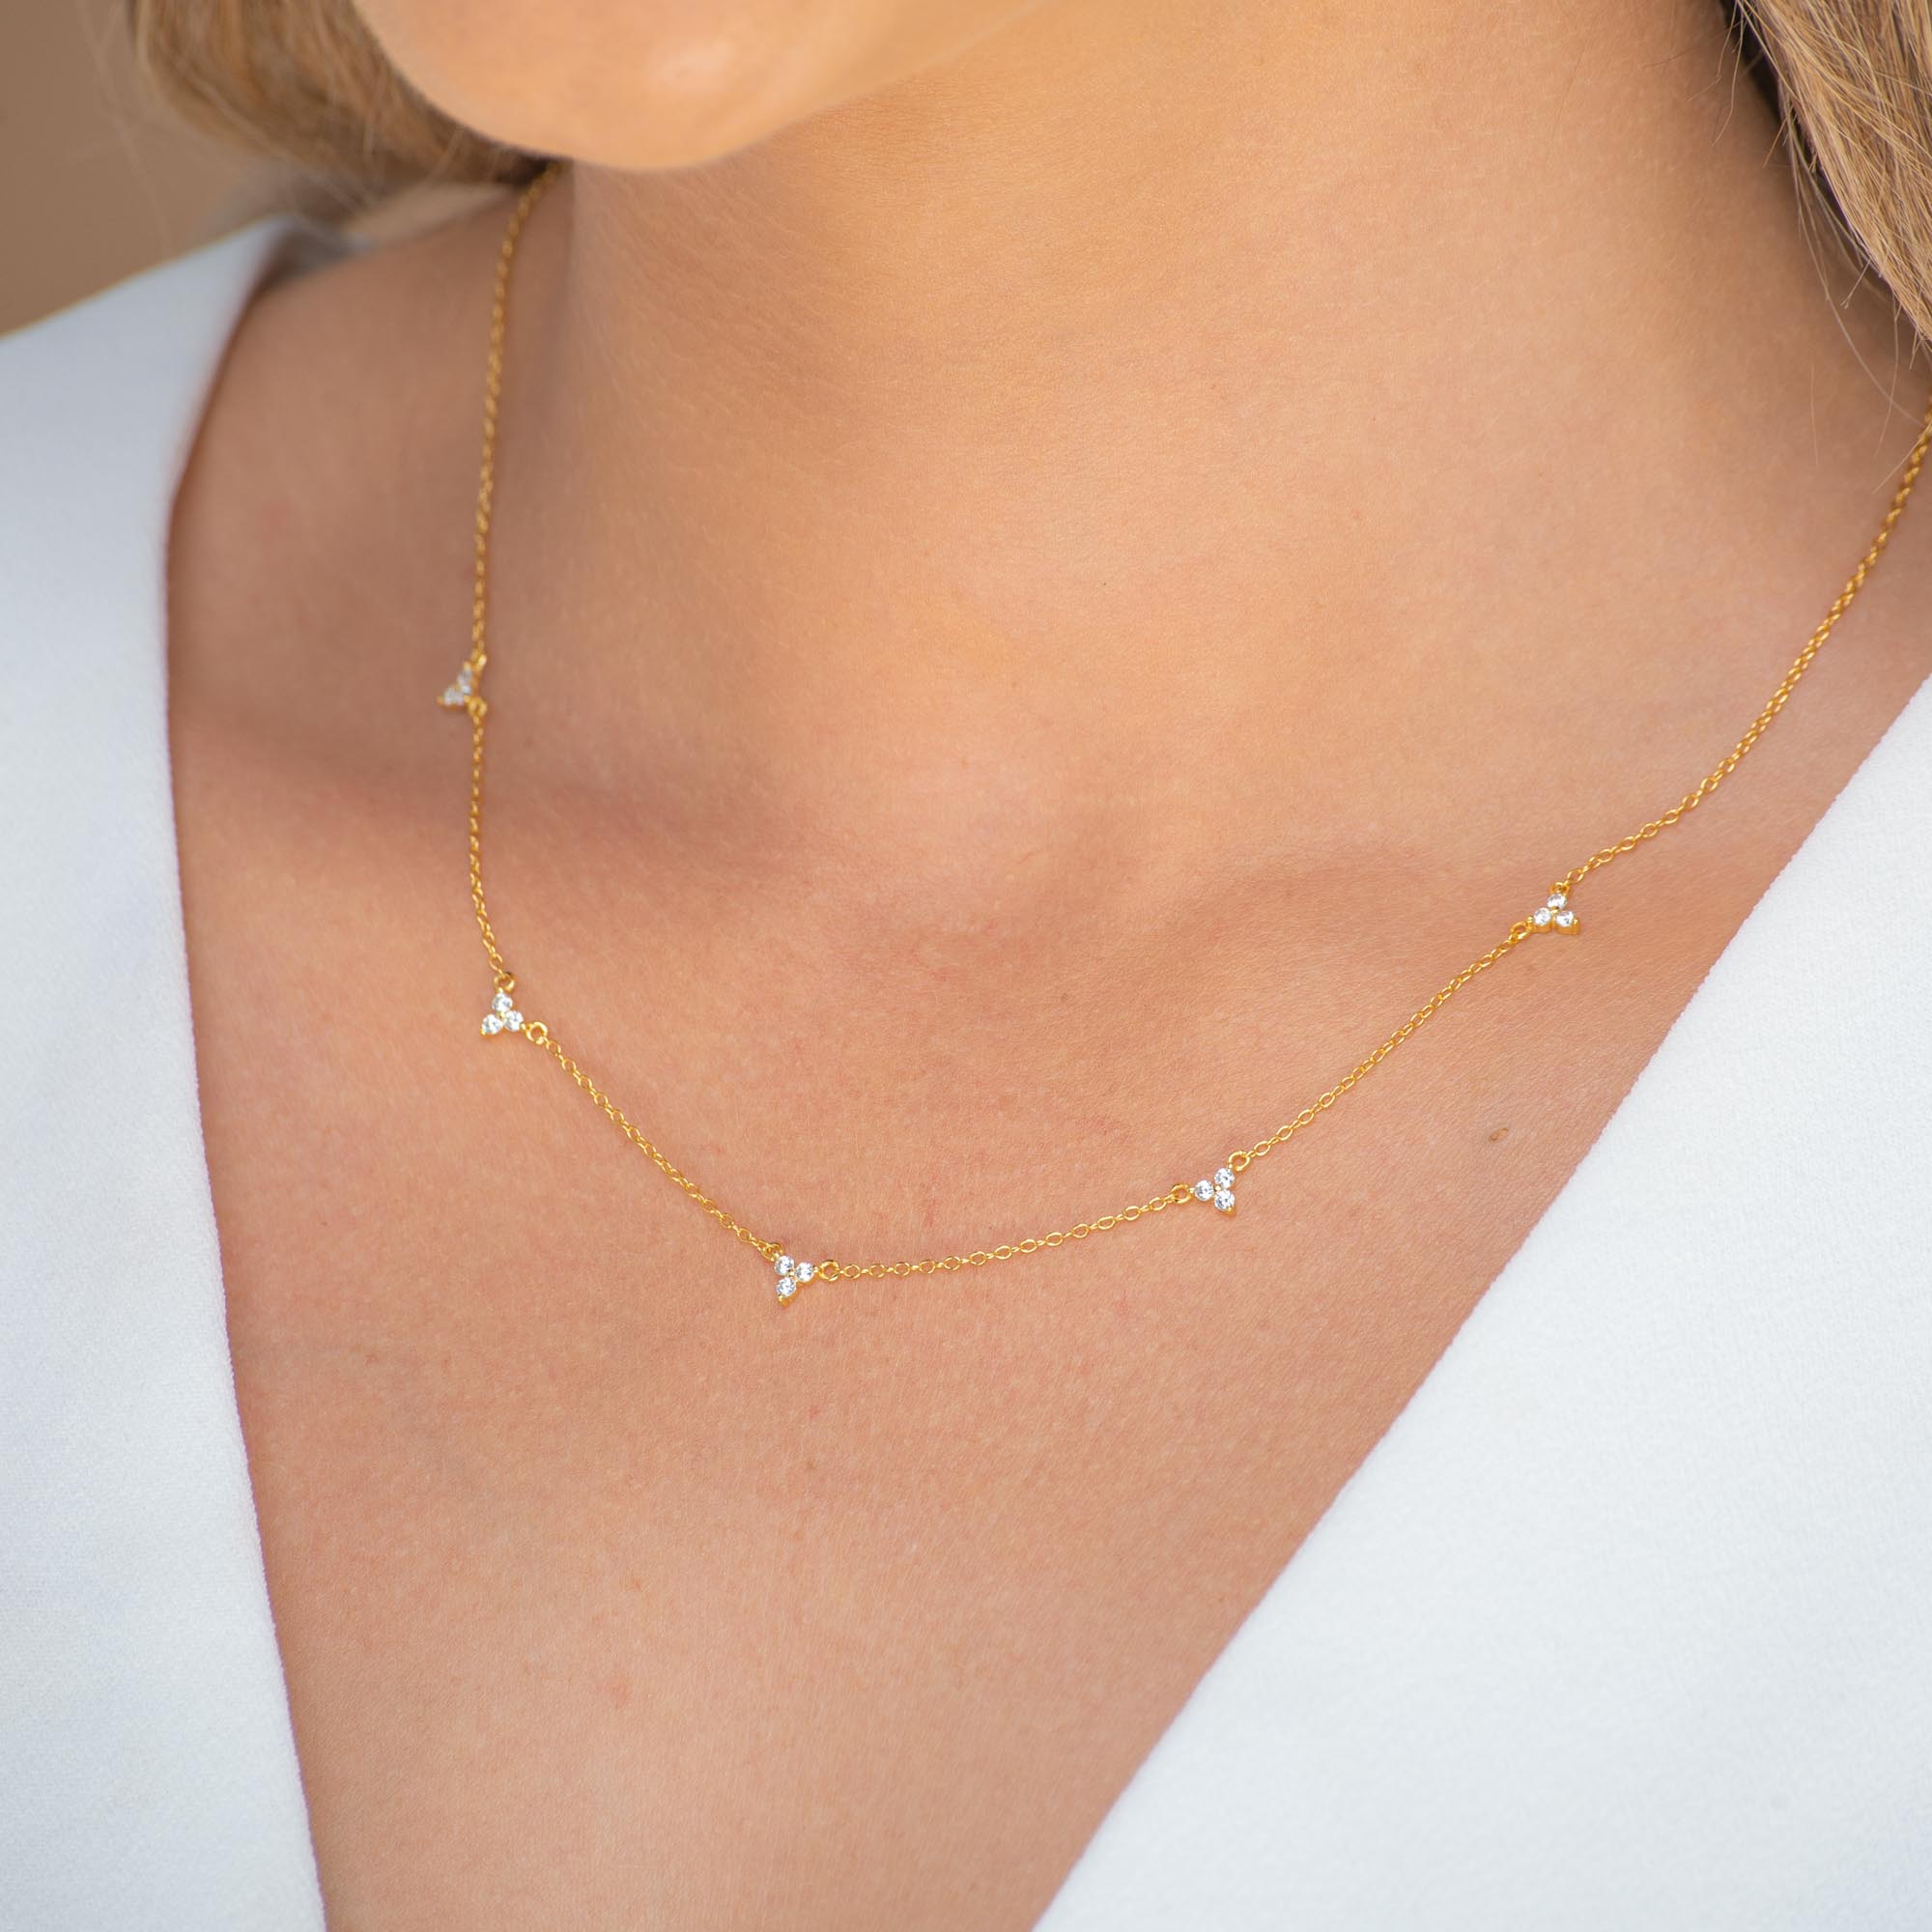 Lotus Station Chain Necklace